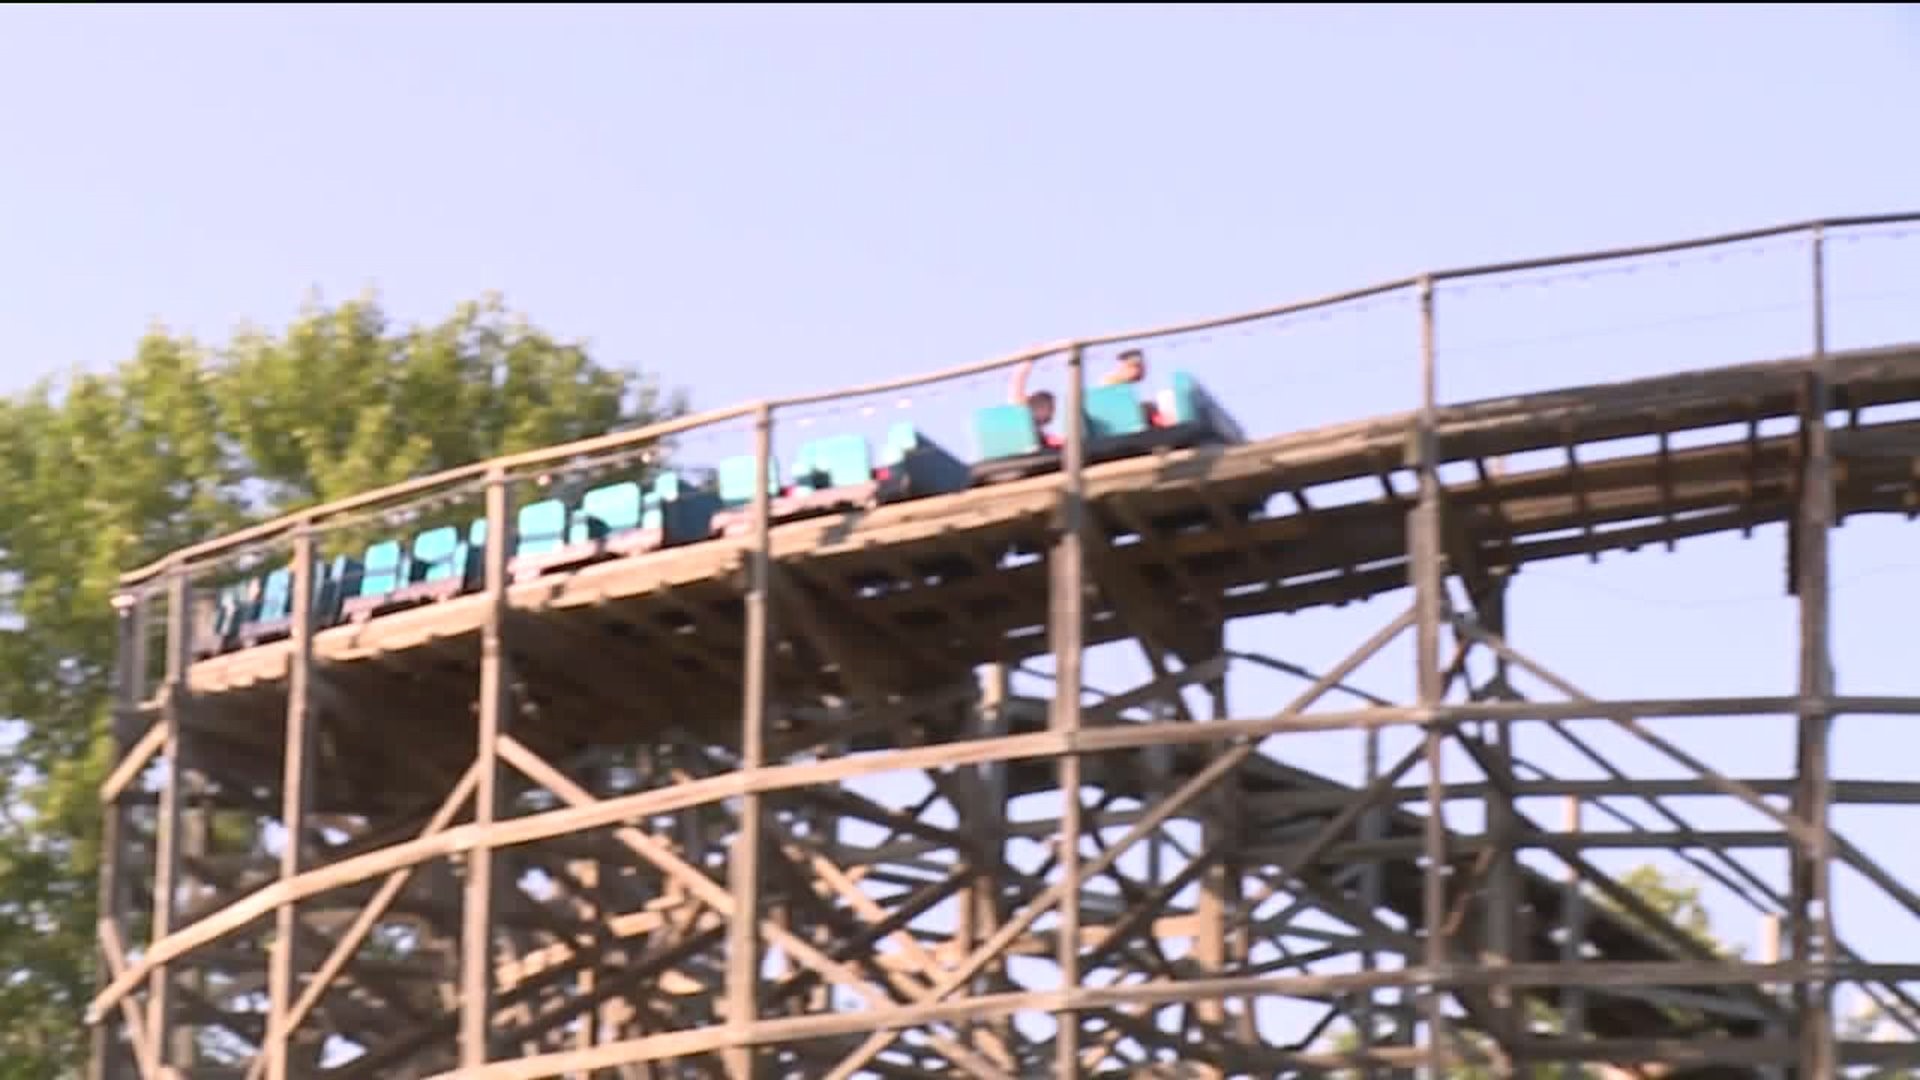 Sunny Weather Draws Crowd at Knoebels